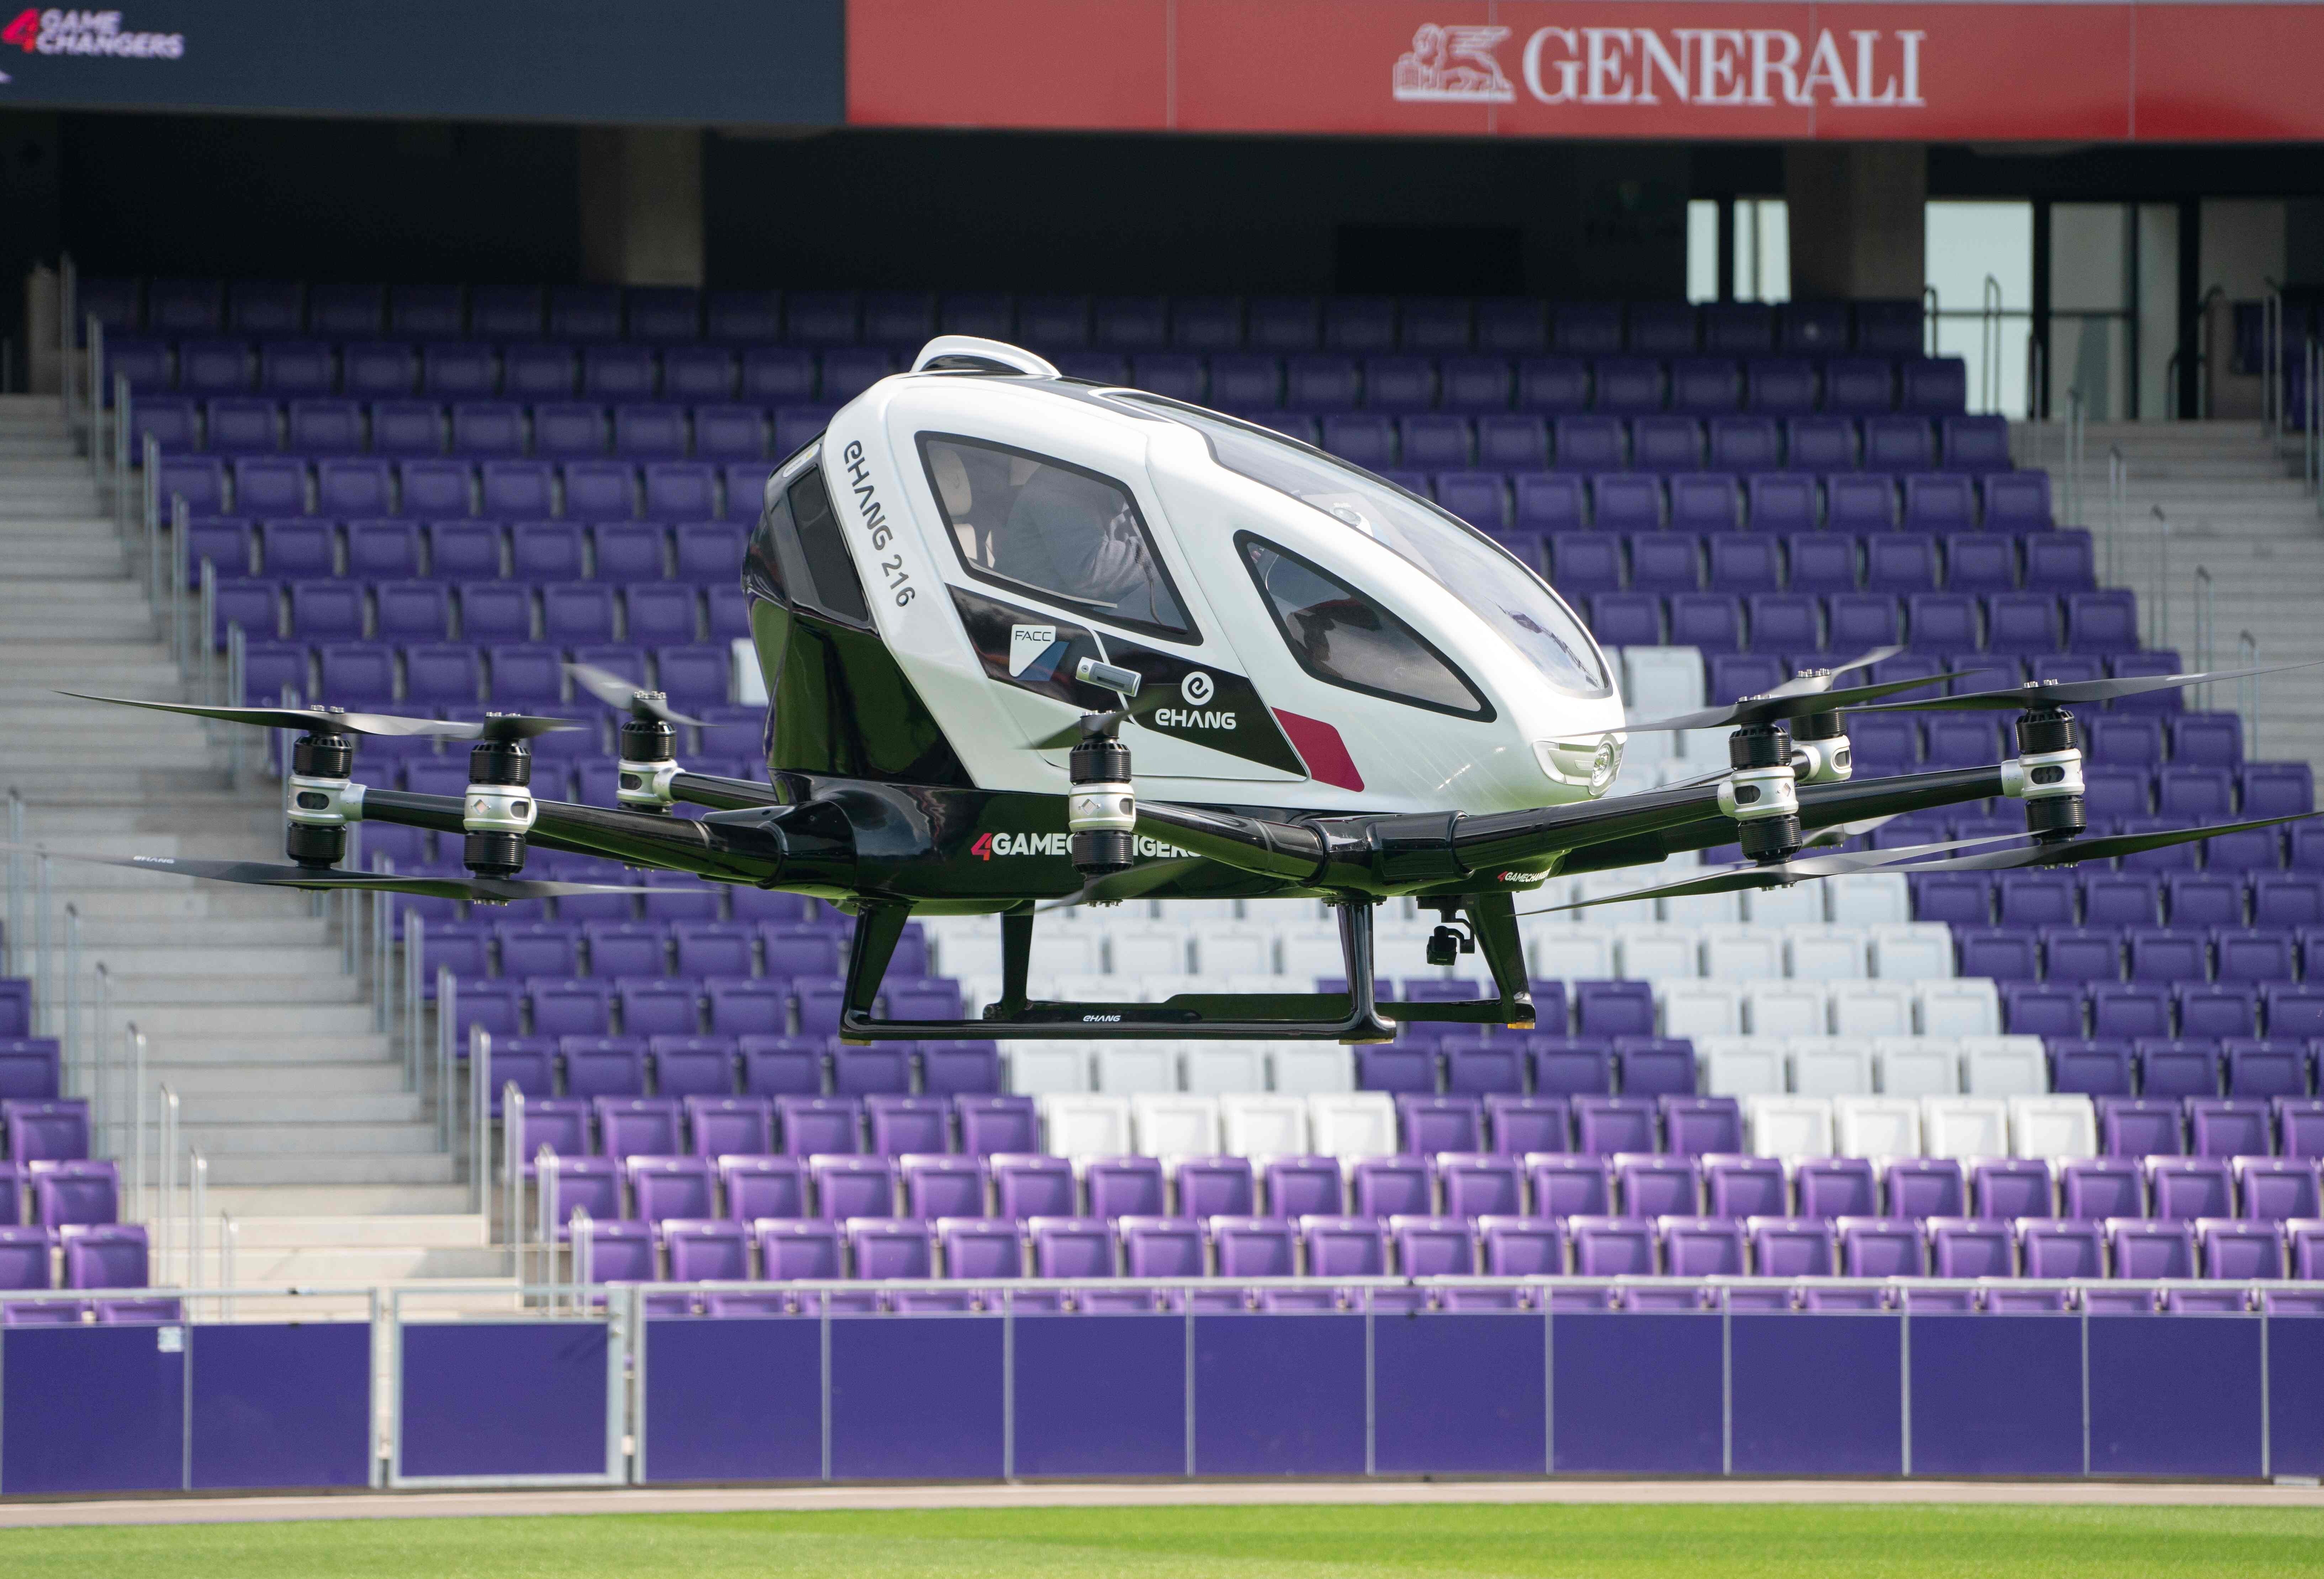 A flying taxi from EHang Holdings takes a short flight during a press preview at Generali Arena in Vienna, Austria. Photo: Agence France-Presse